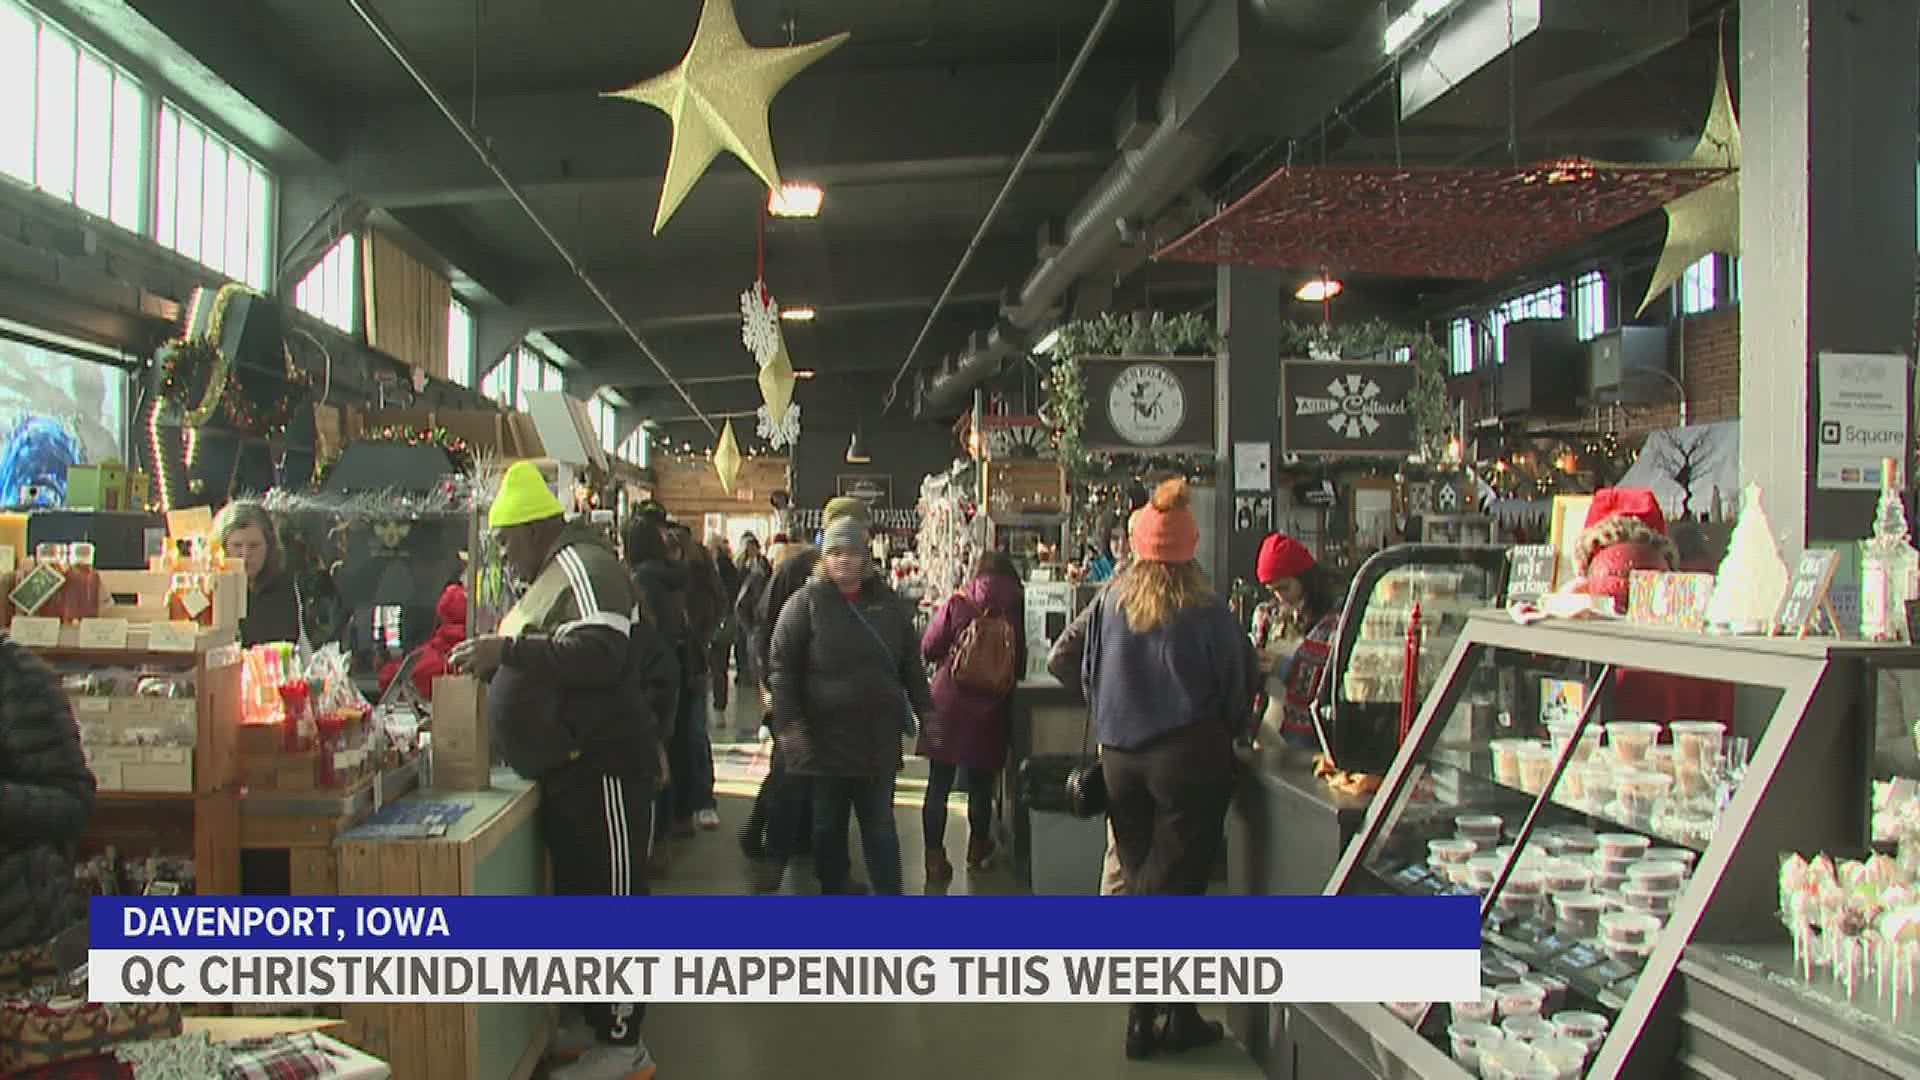 Over 60 vendors came to Davenport's Freight House Farmers Market for the fifth annual chriskindlmarket. Food, jewelry and wine were just a few products on display.